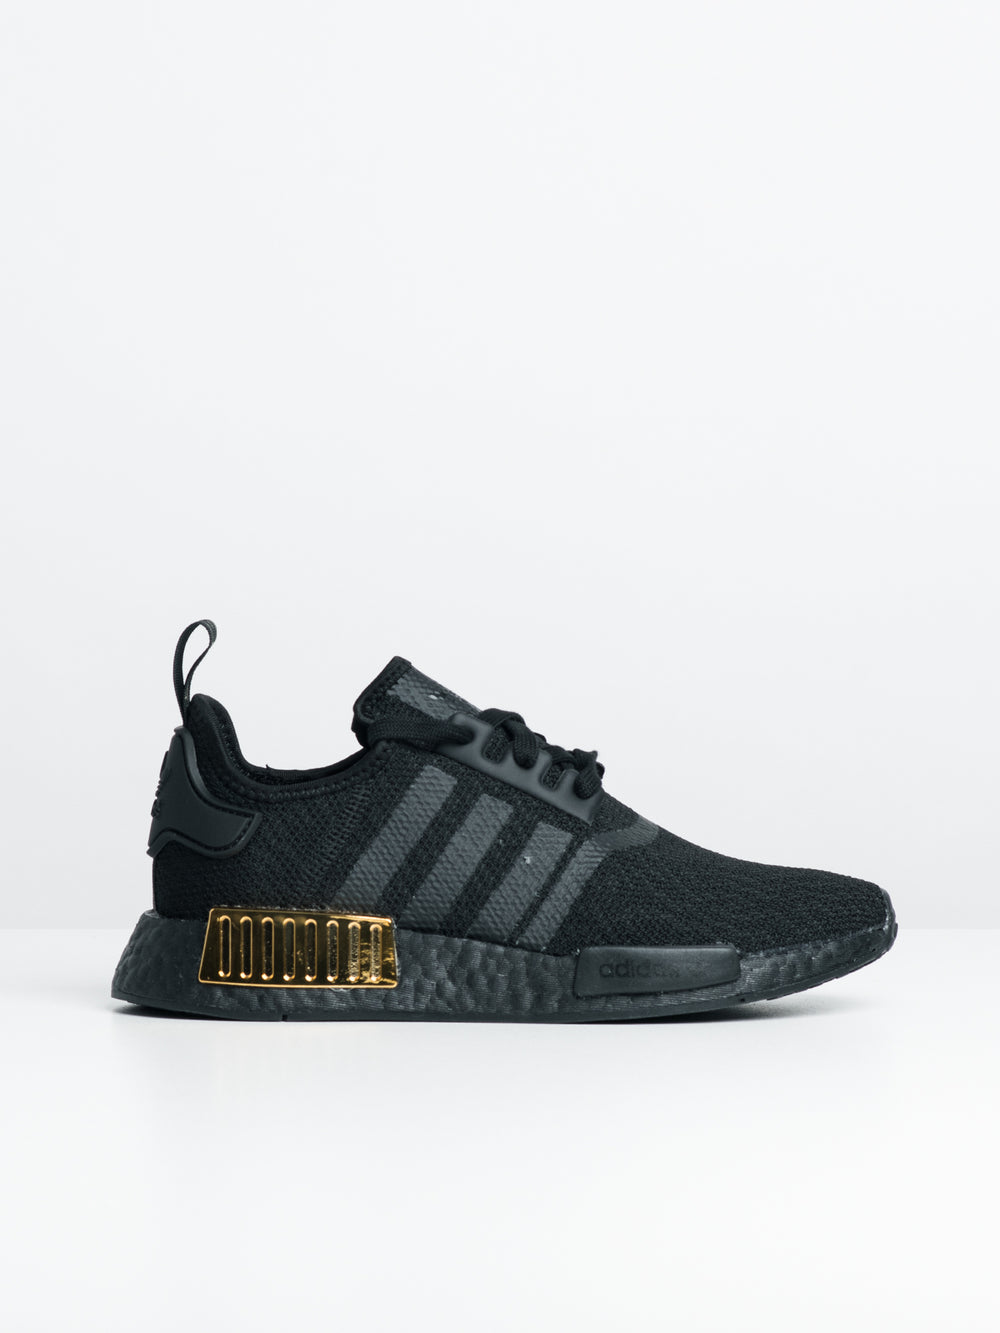 WOMENS ADIDAS NMD_R1 SNEAKERS- BLACK - CLEARANCE